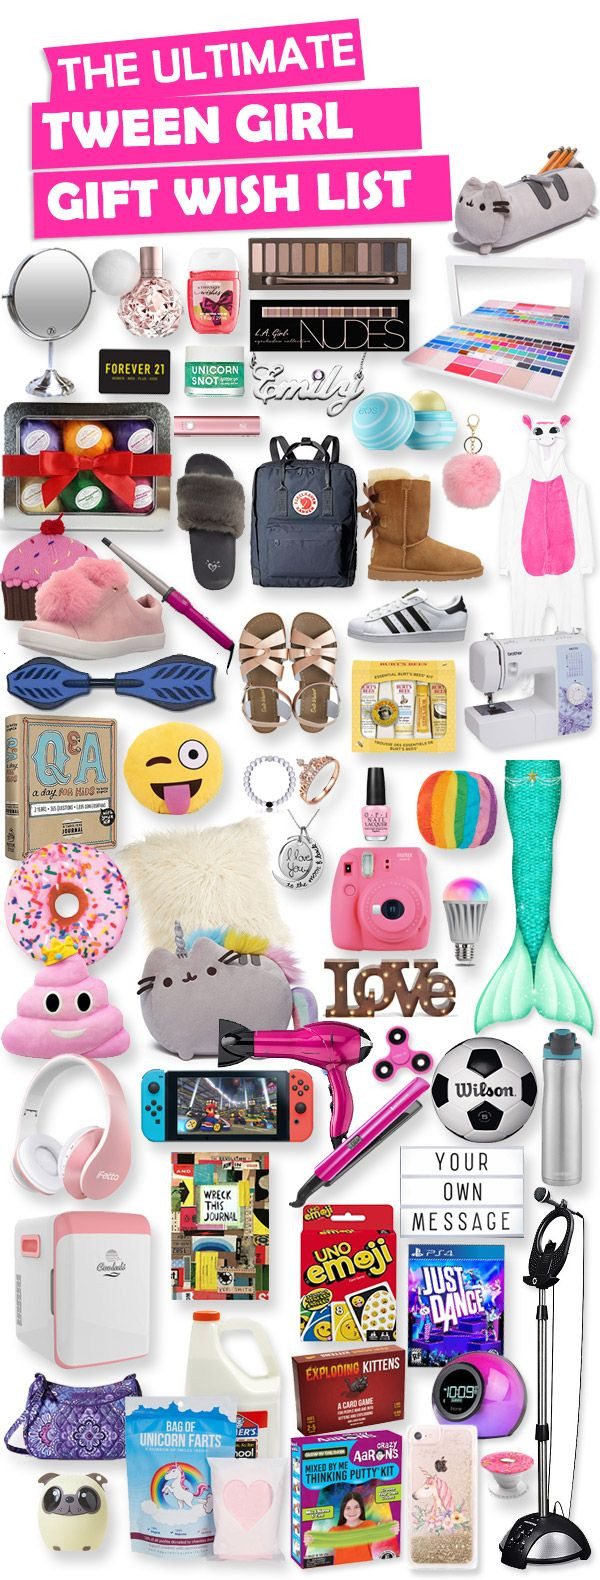 Best Gift Ideas For Tween Girls
 Gifts For Tween Girls [Best Gift Ideas for 2019]